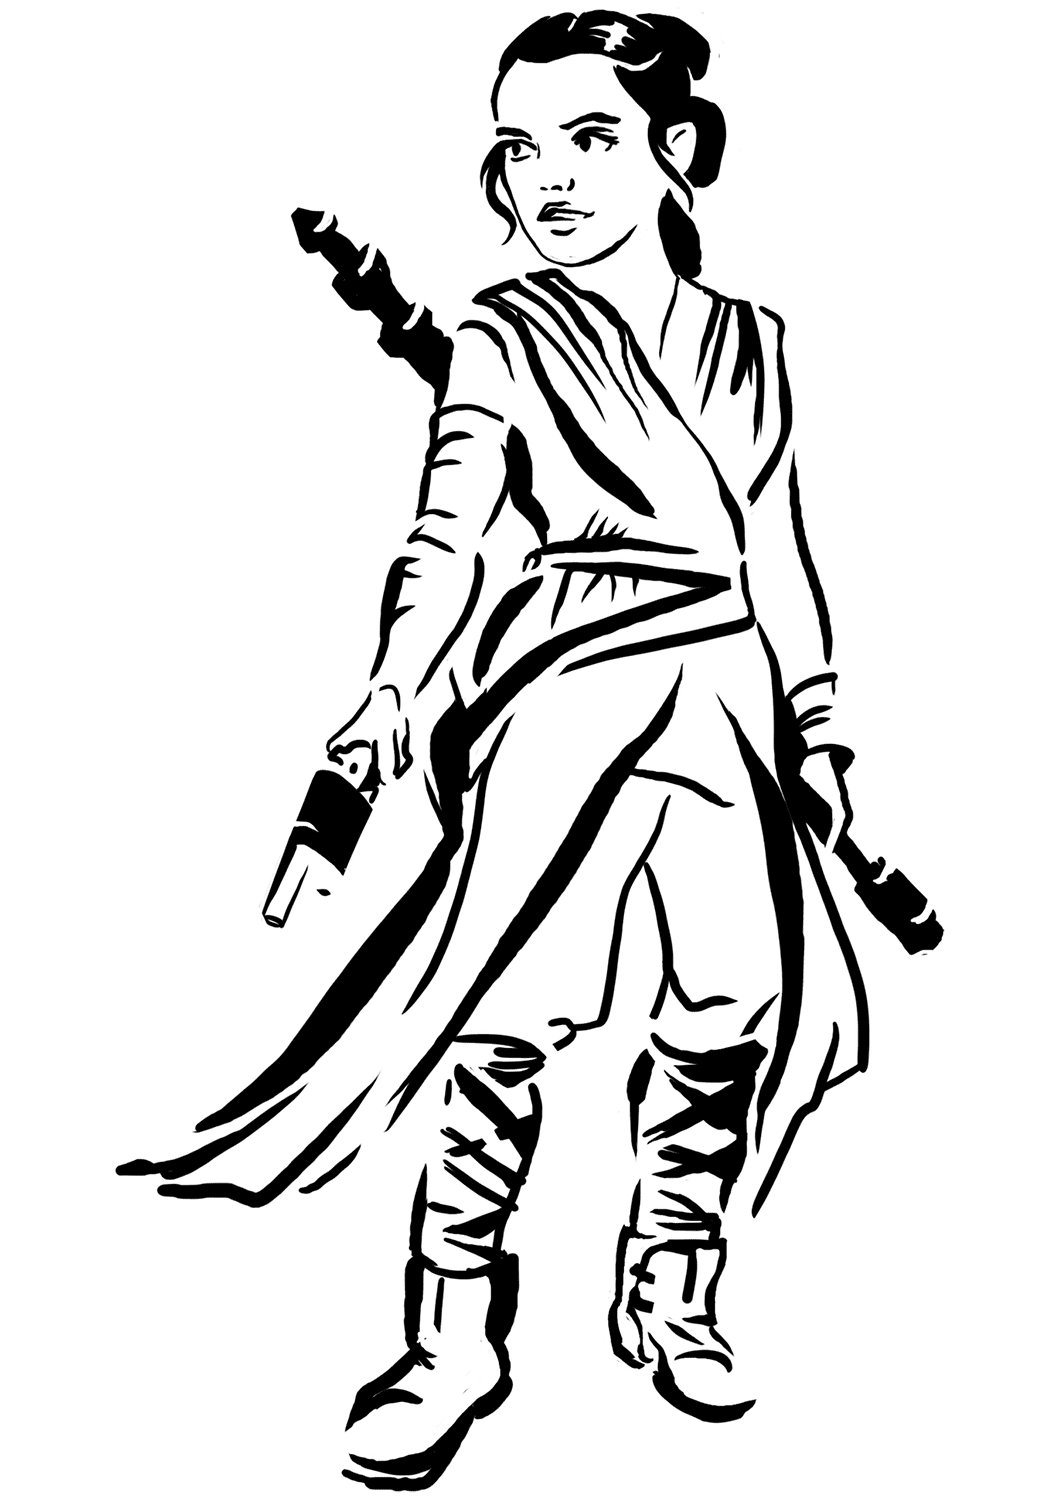 Rey Star Wars Episode VII The Force Awakens Coloring Page